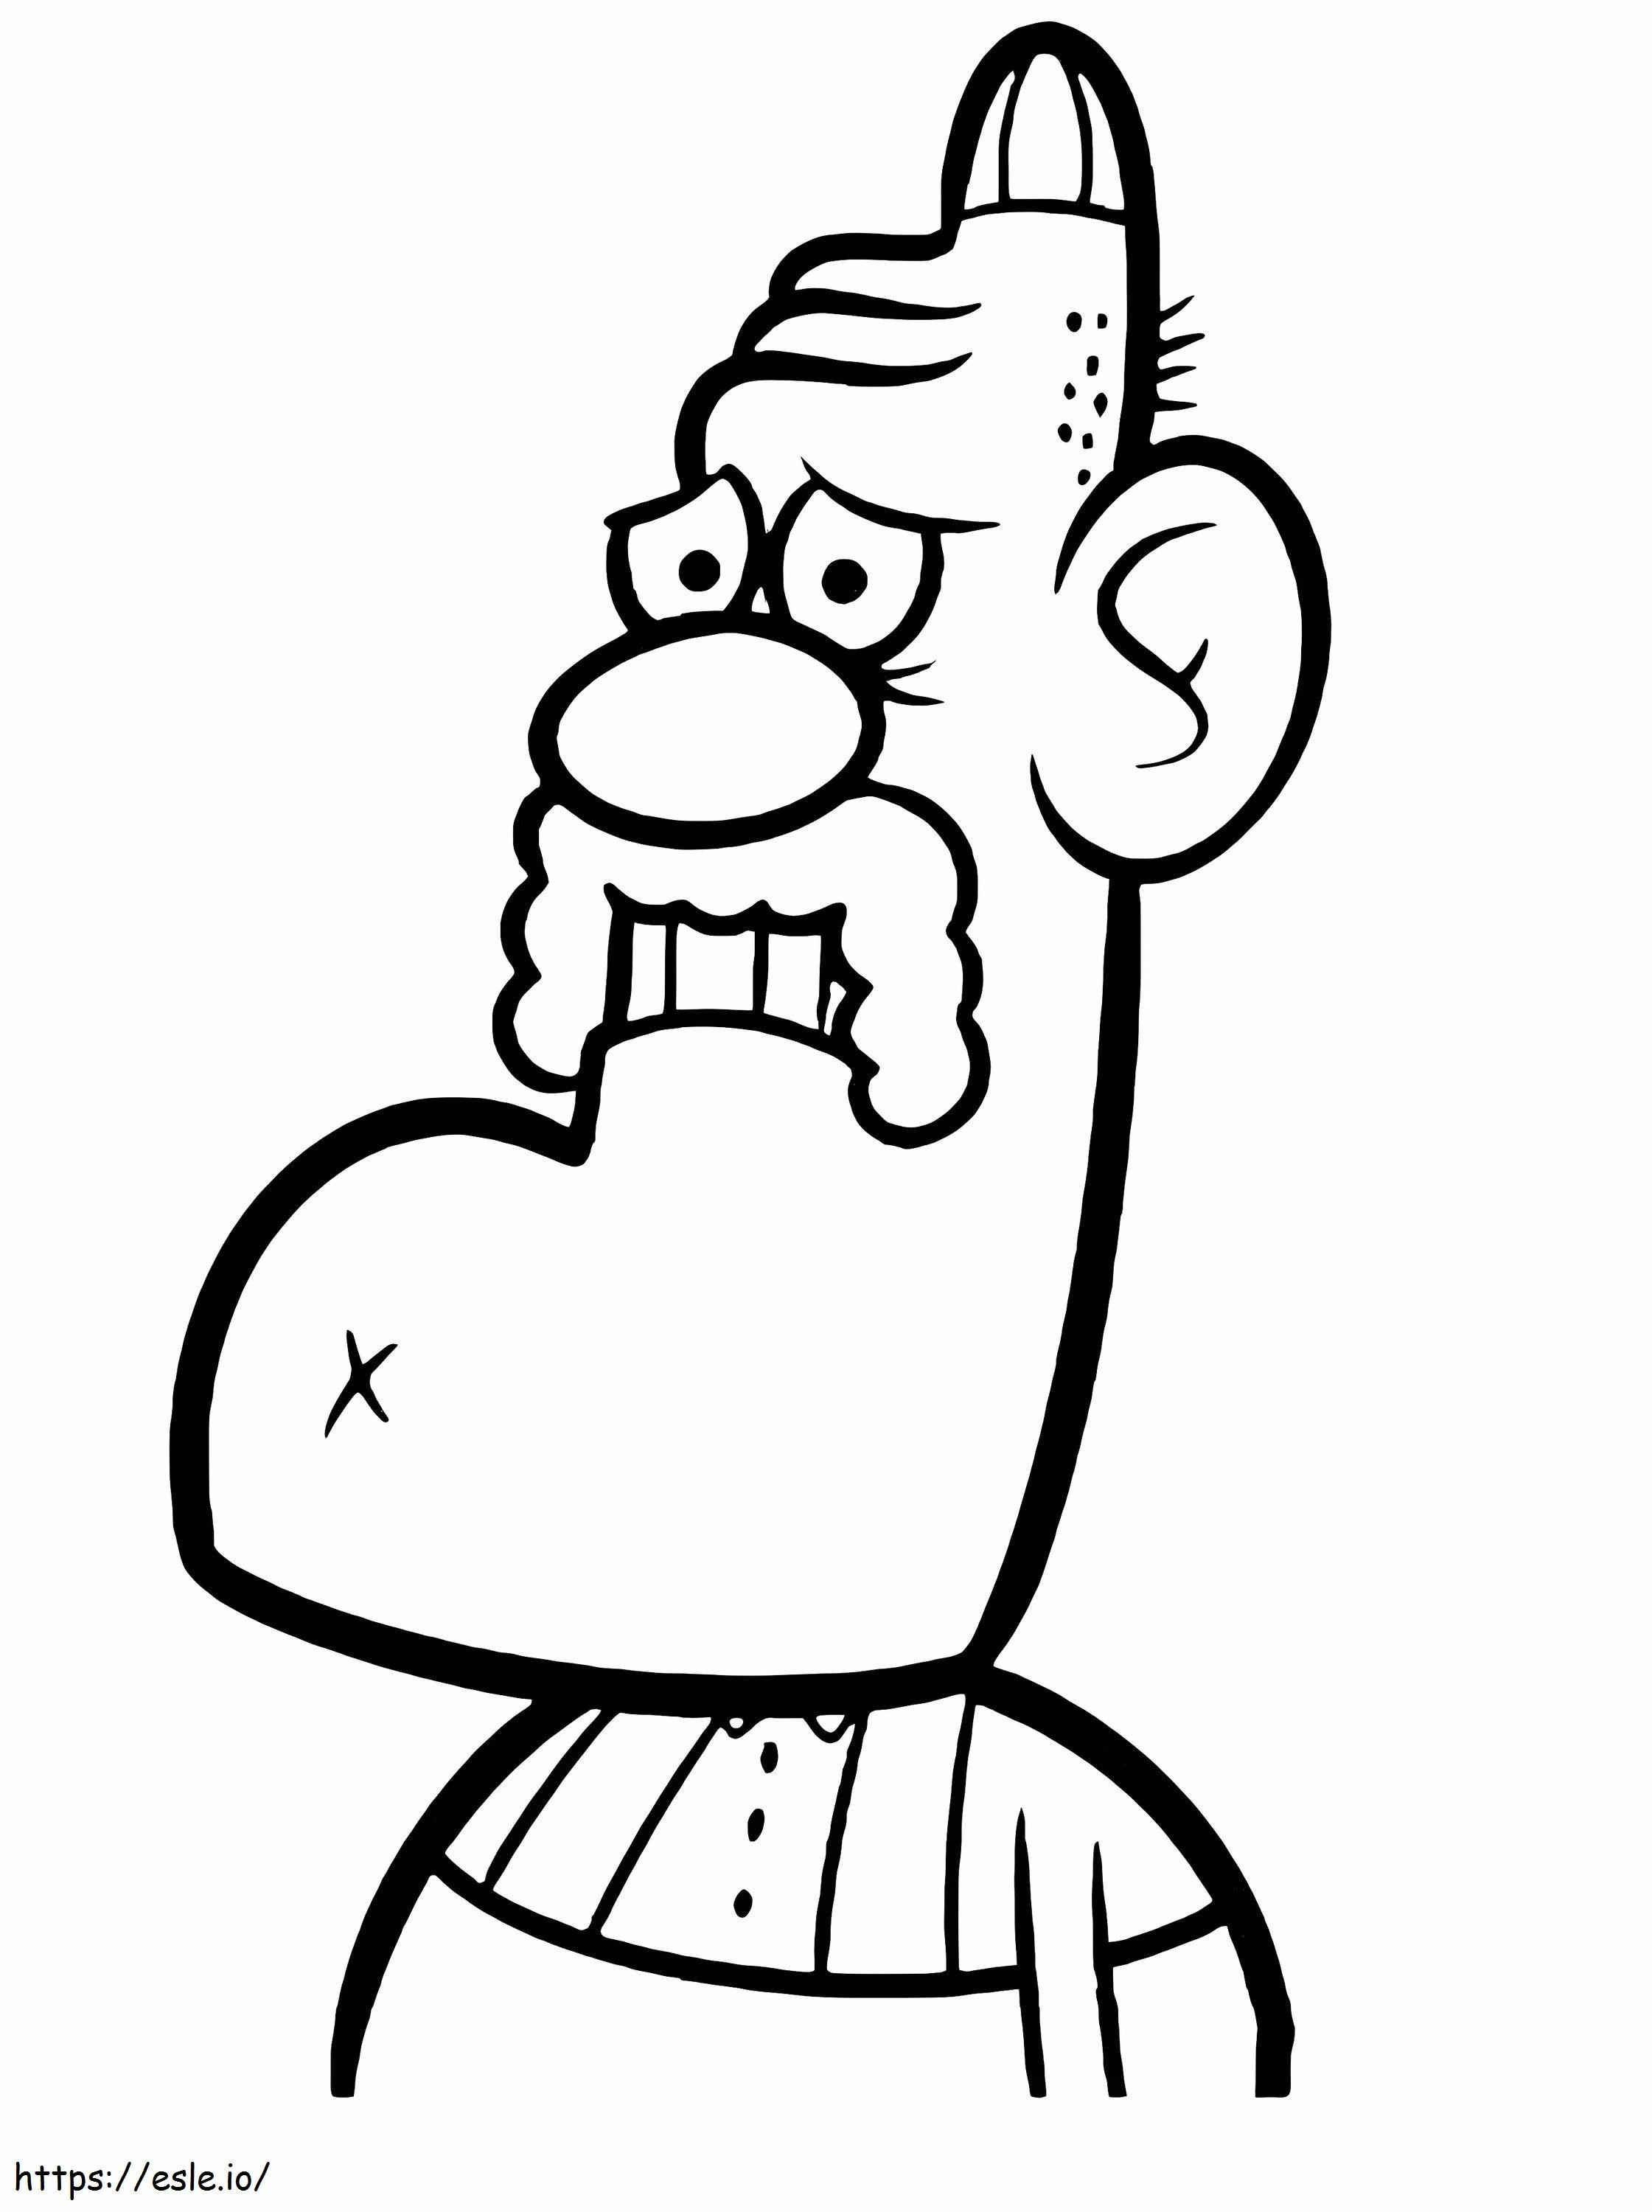 Printable Uncle Grandpa coloring page